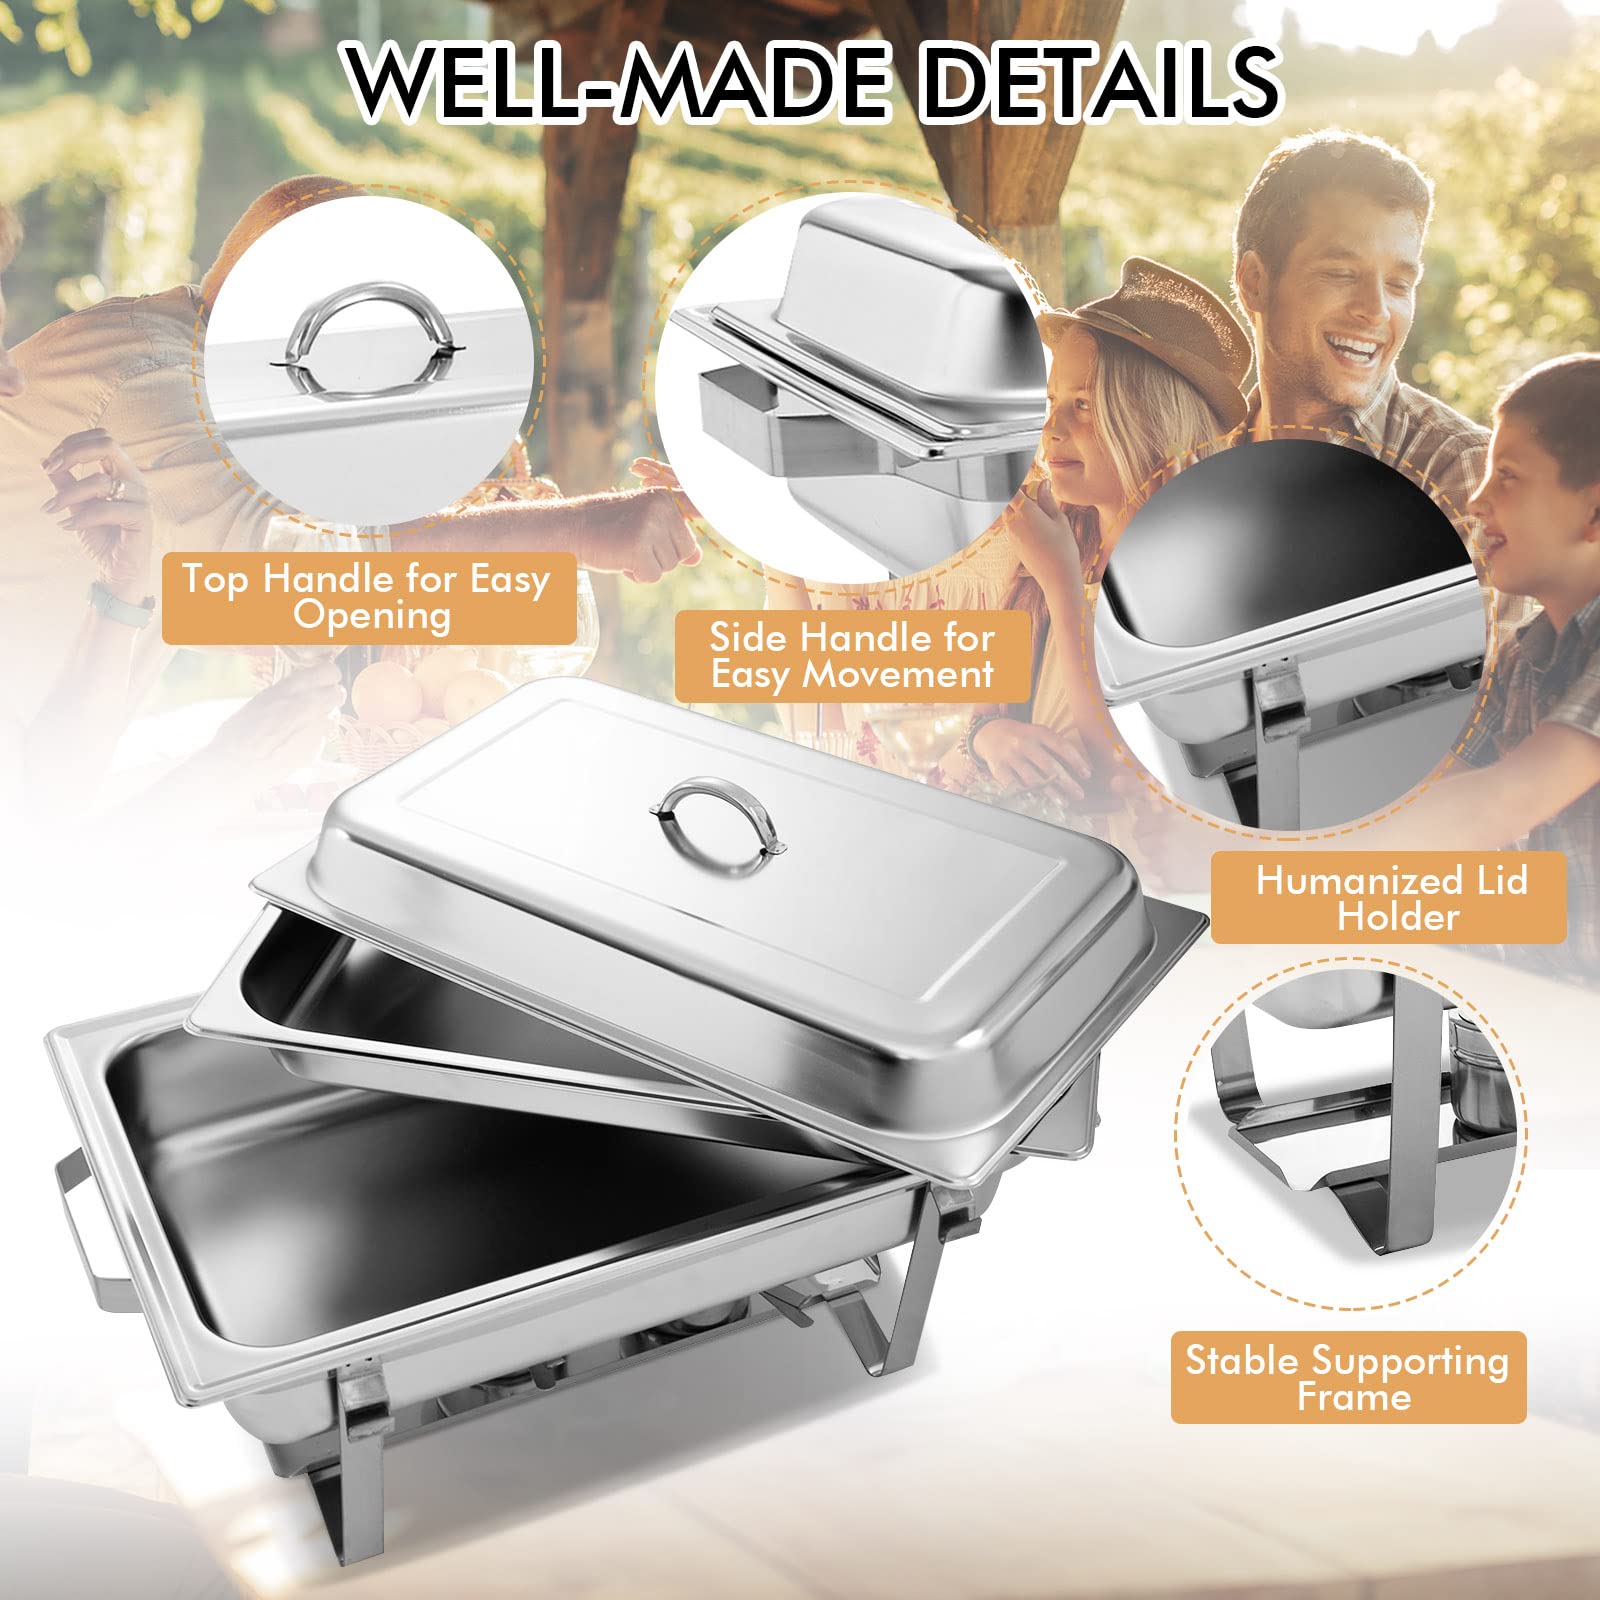 Giantex 2 Packs Chafing Dish 9 Quart Chafter Dishes Stainless Steel